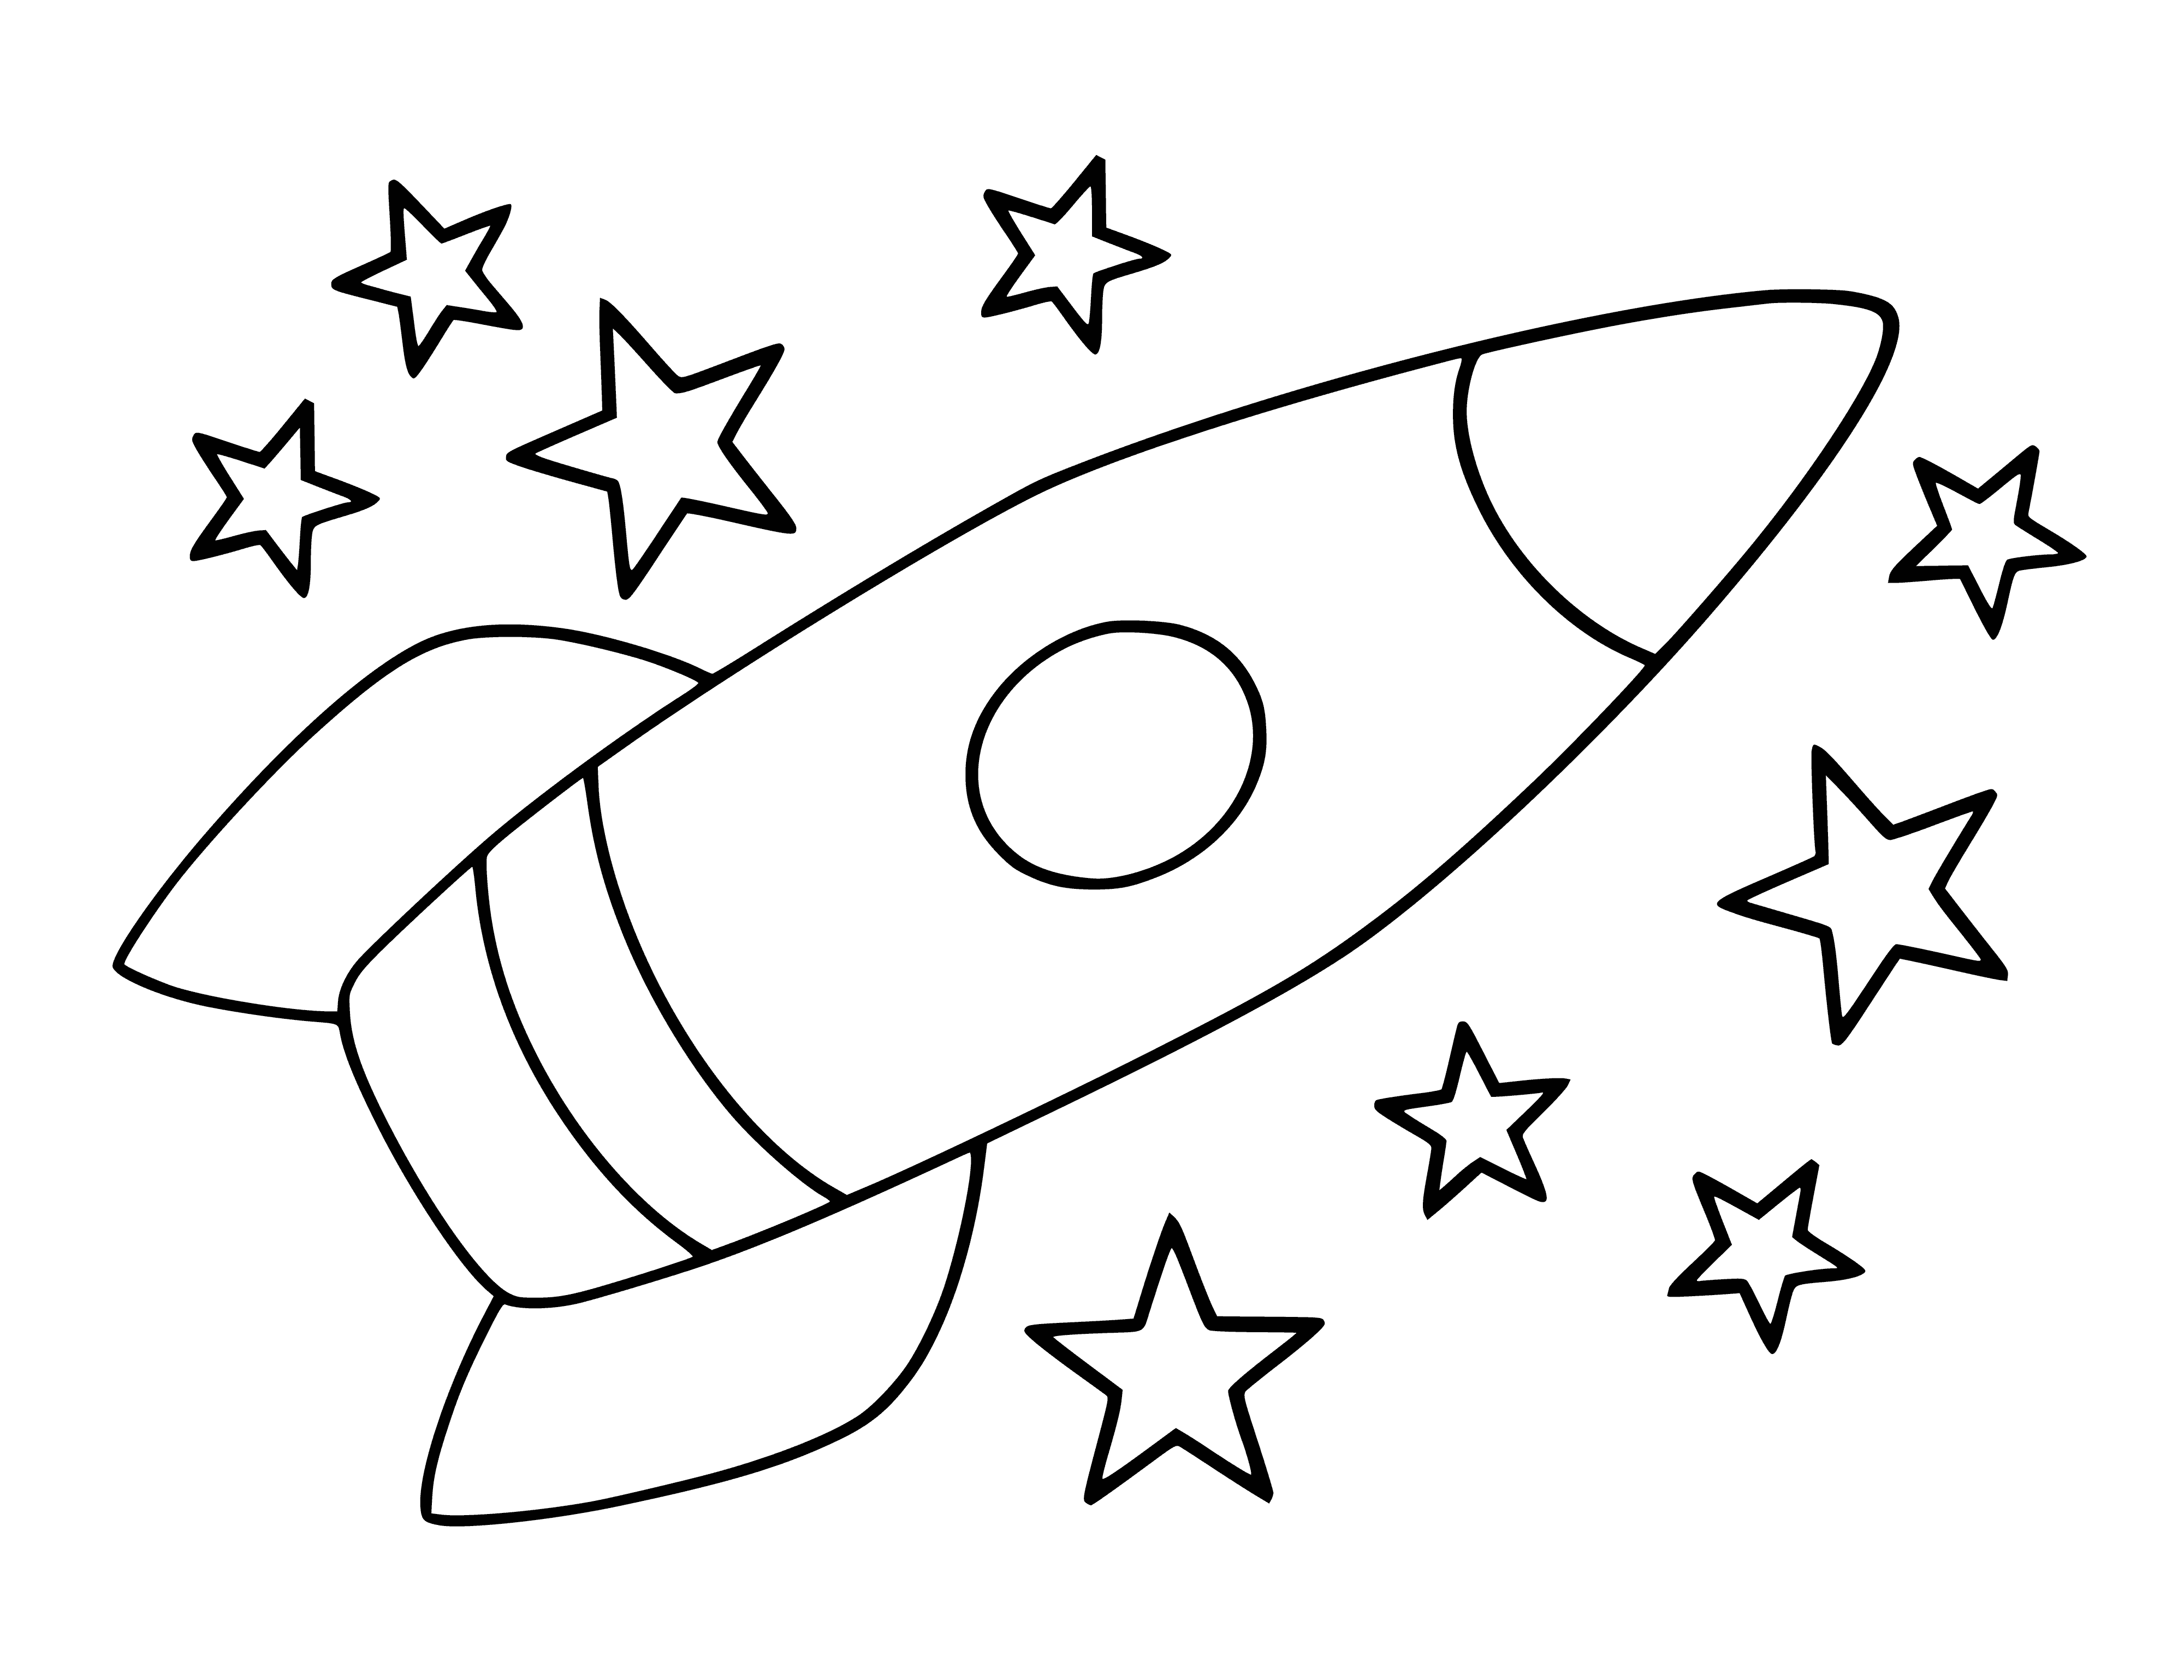 coloring page: Rocket ship ready for take-off, mostly blue with stripes & yellow circle; 3 big windows & one small one; stars & planets in background.